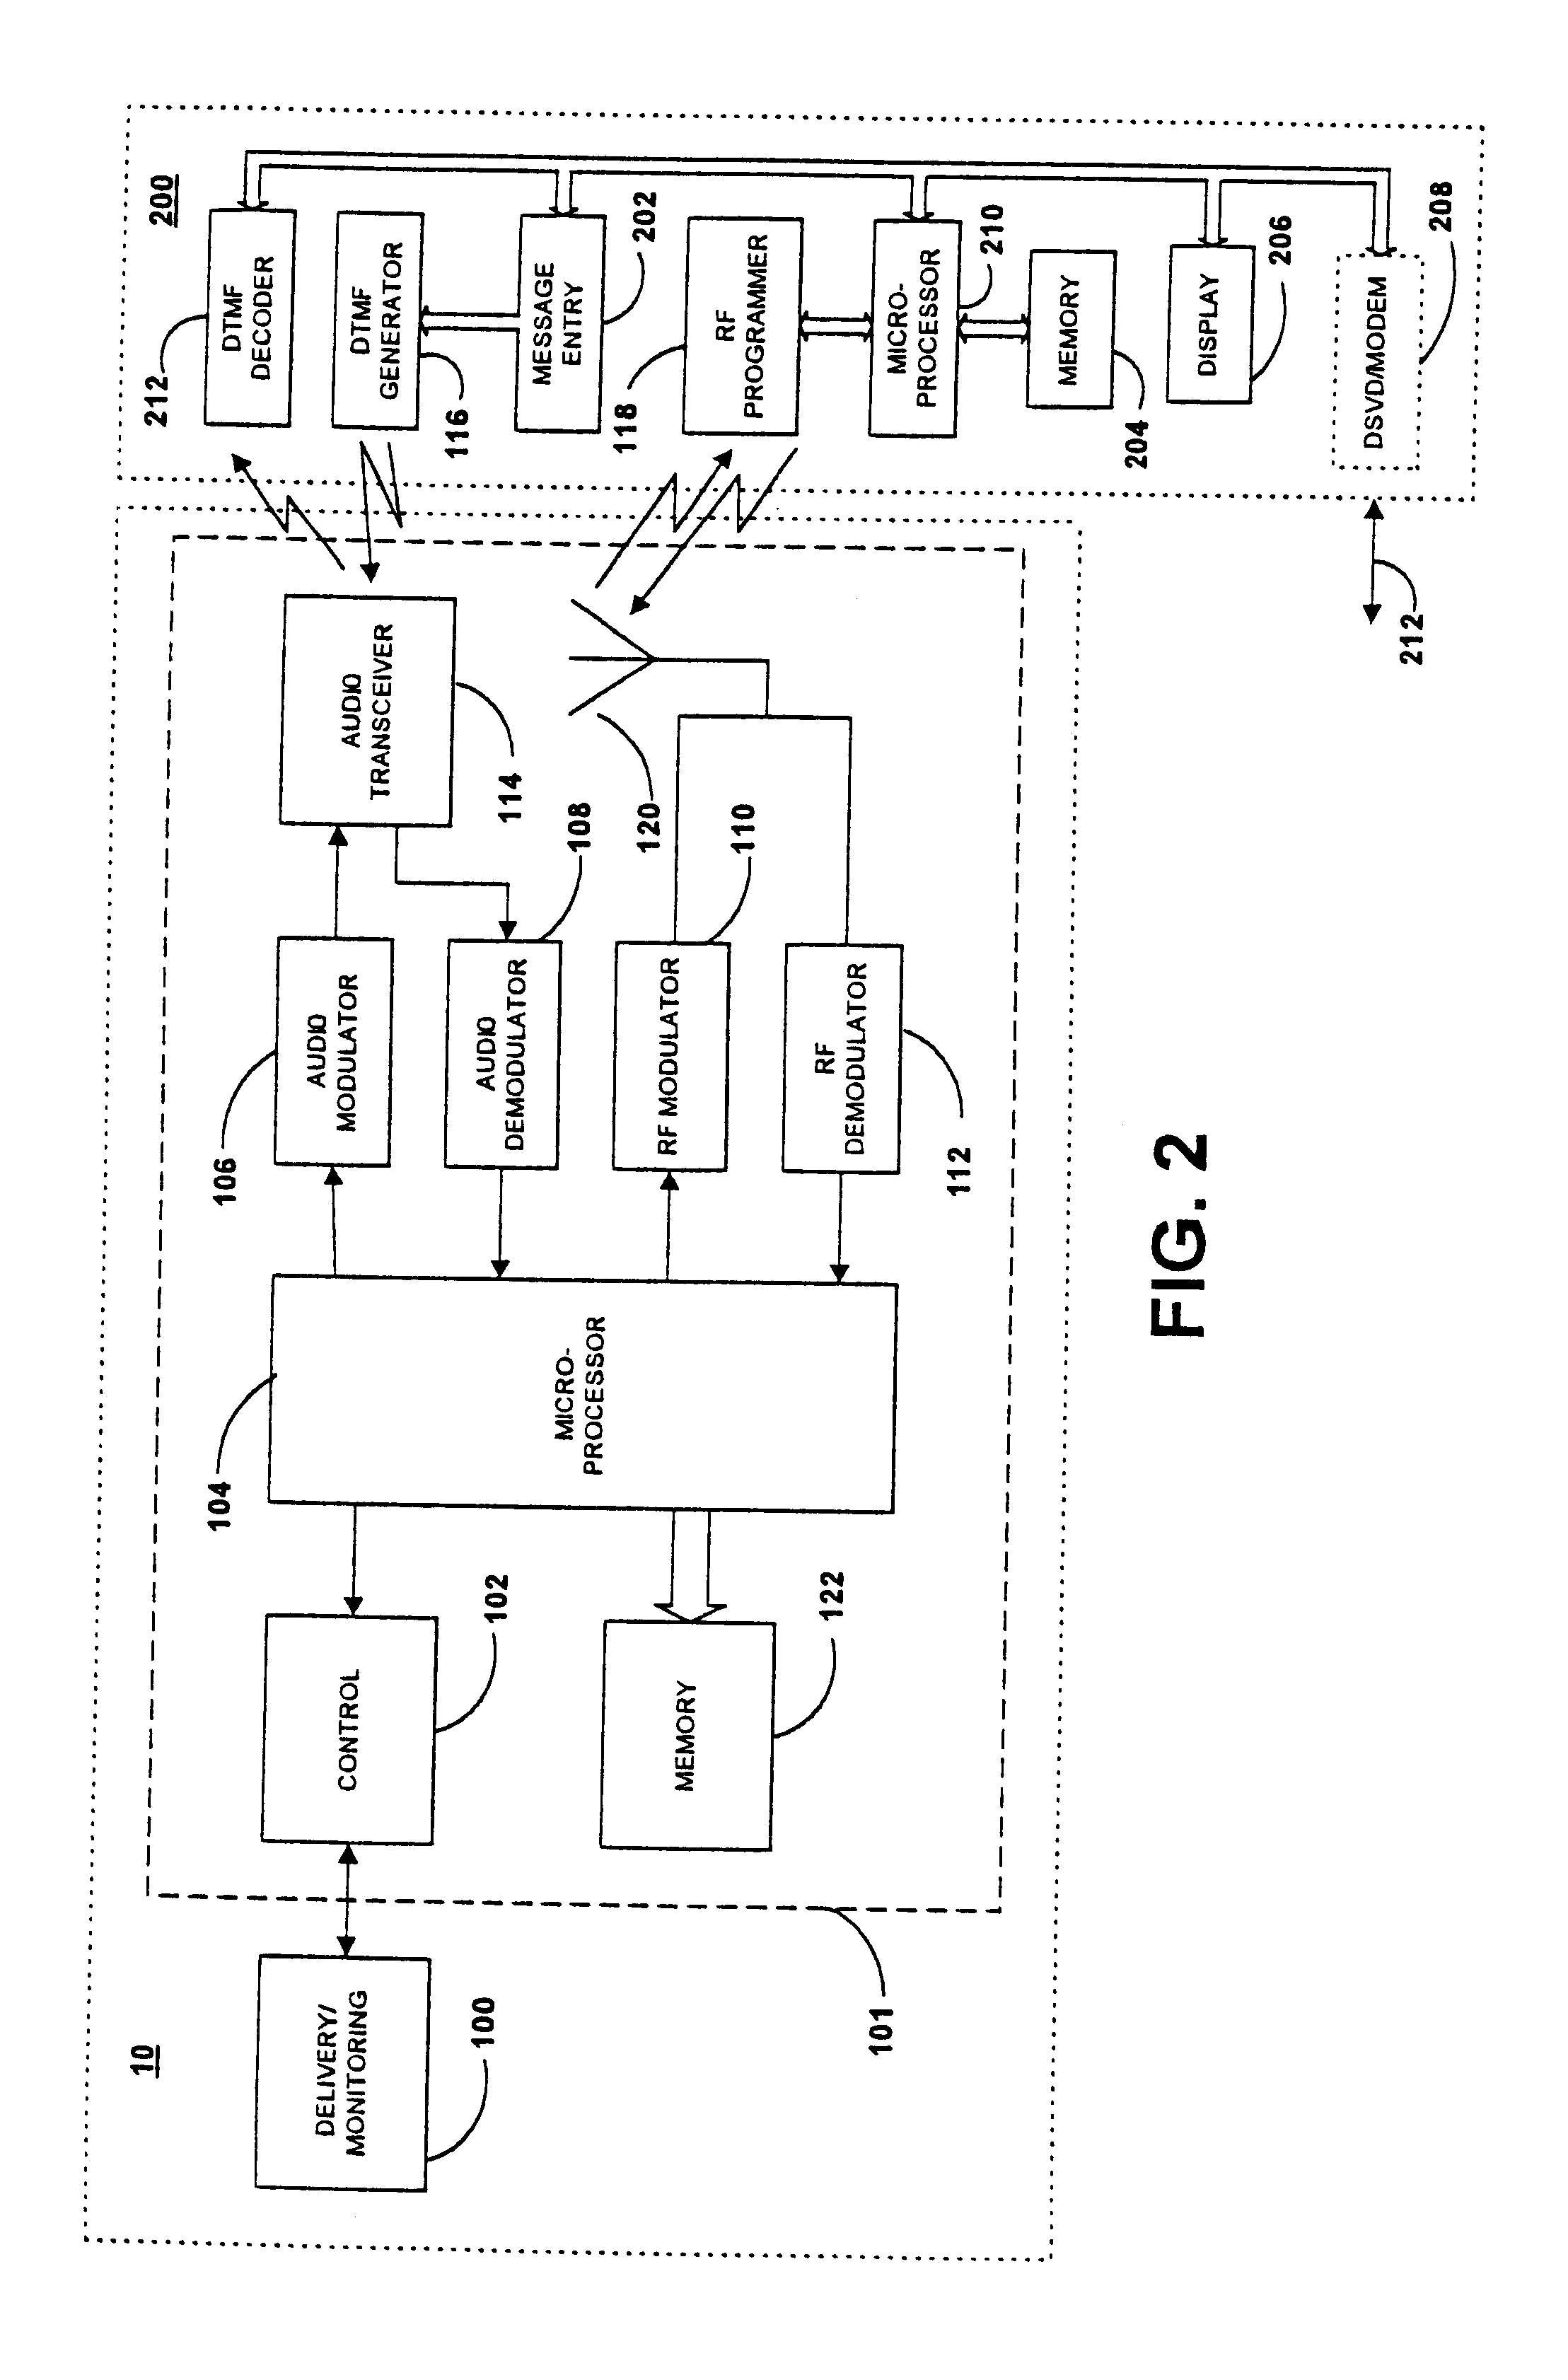 Method and apparatus for communicating with an implantable medical device with DTMF tones